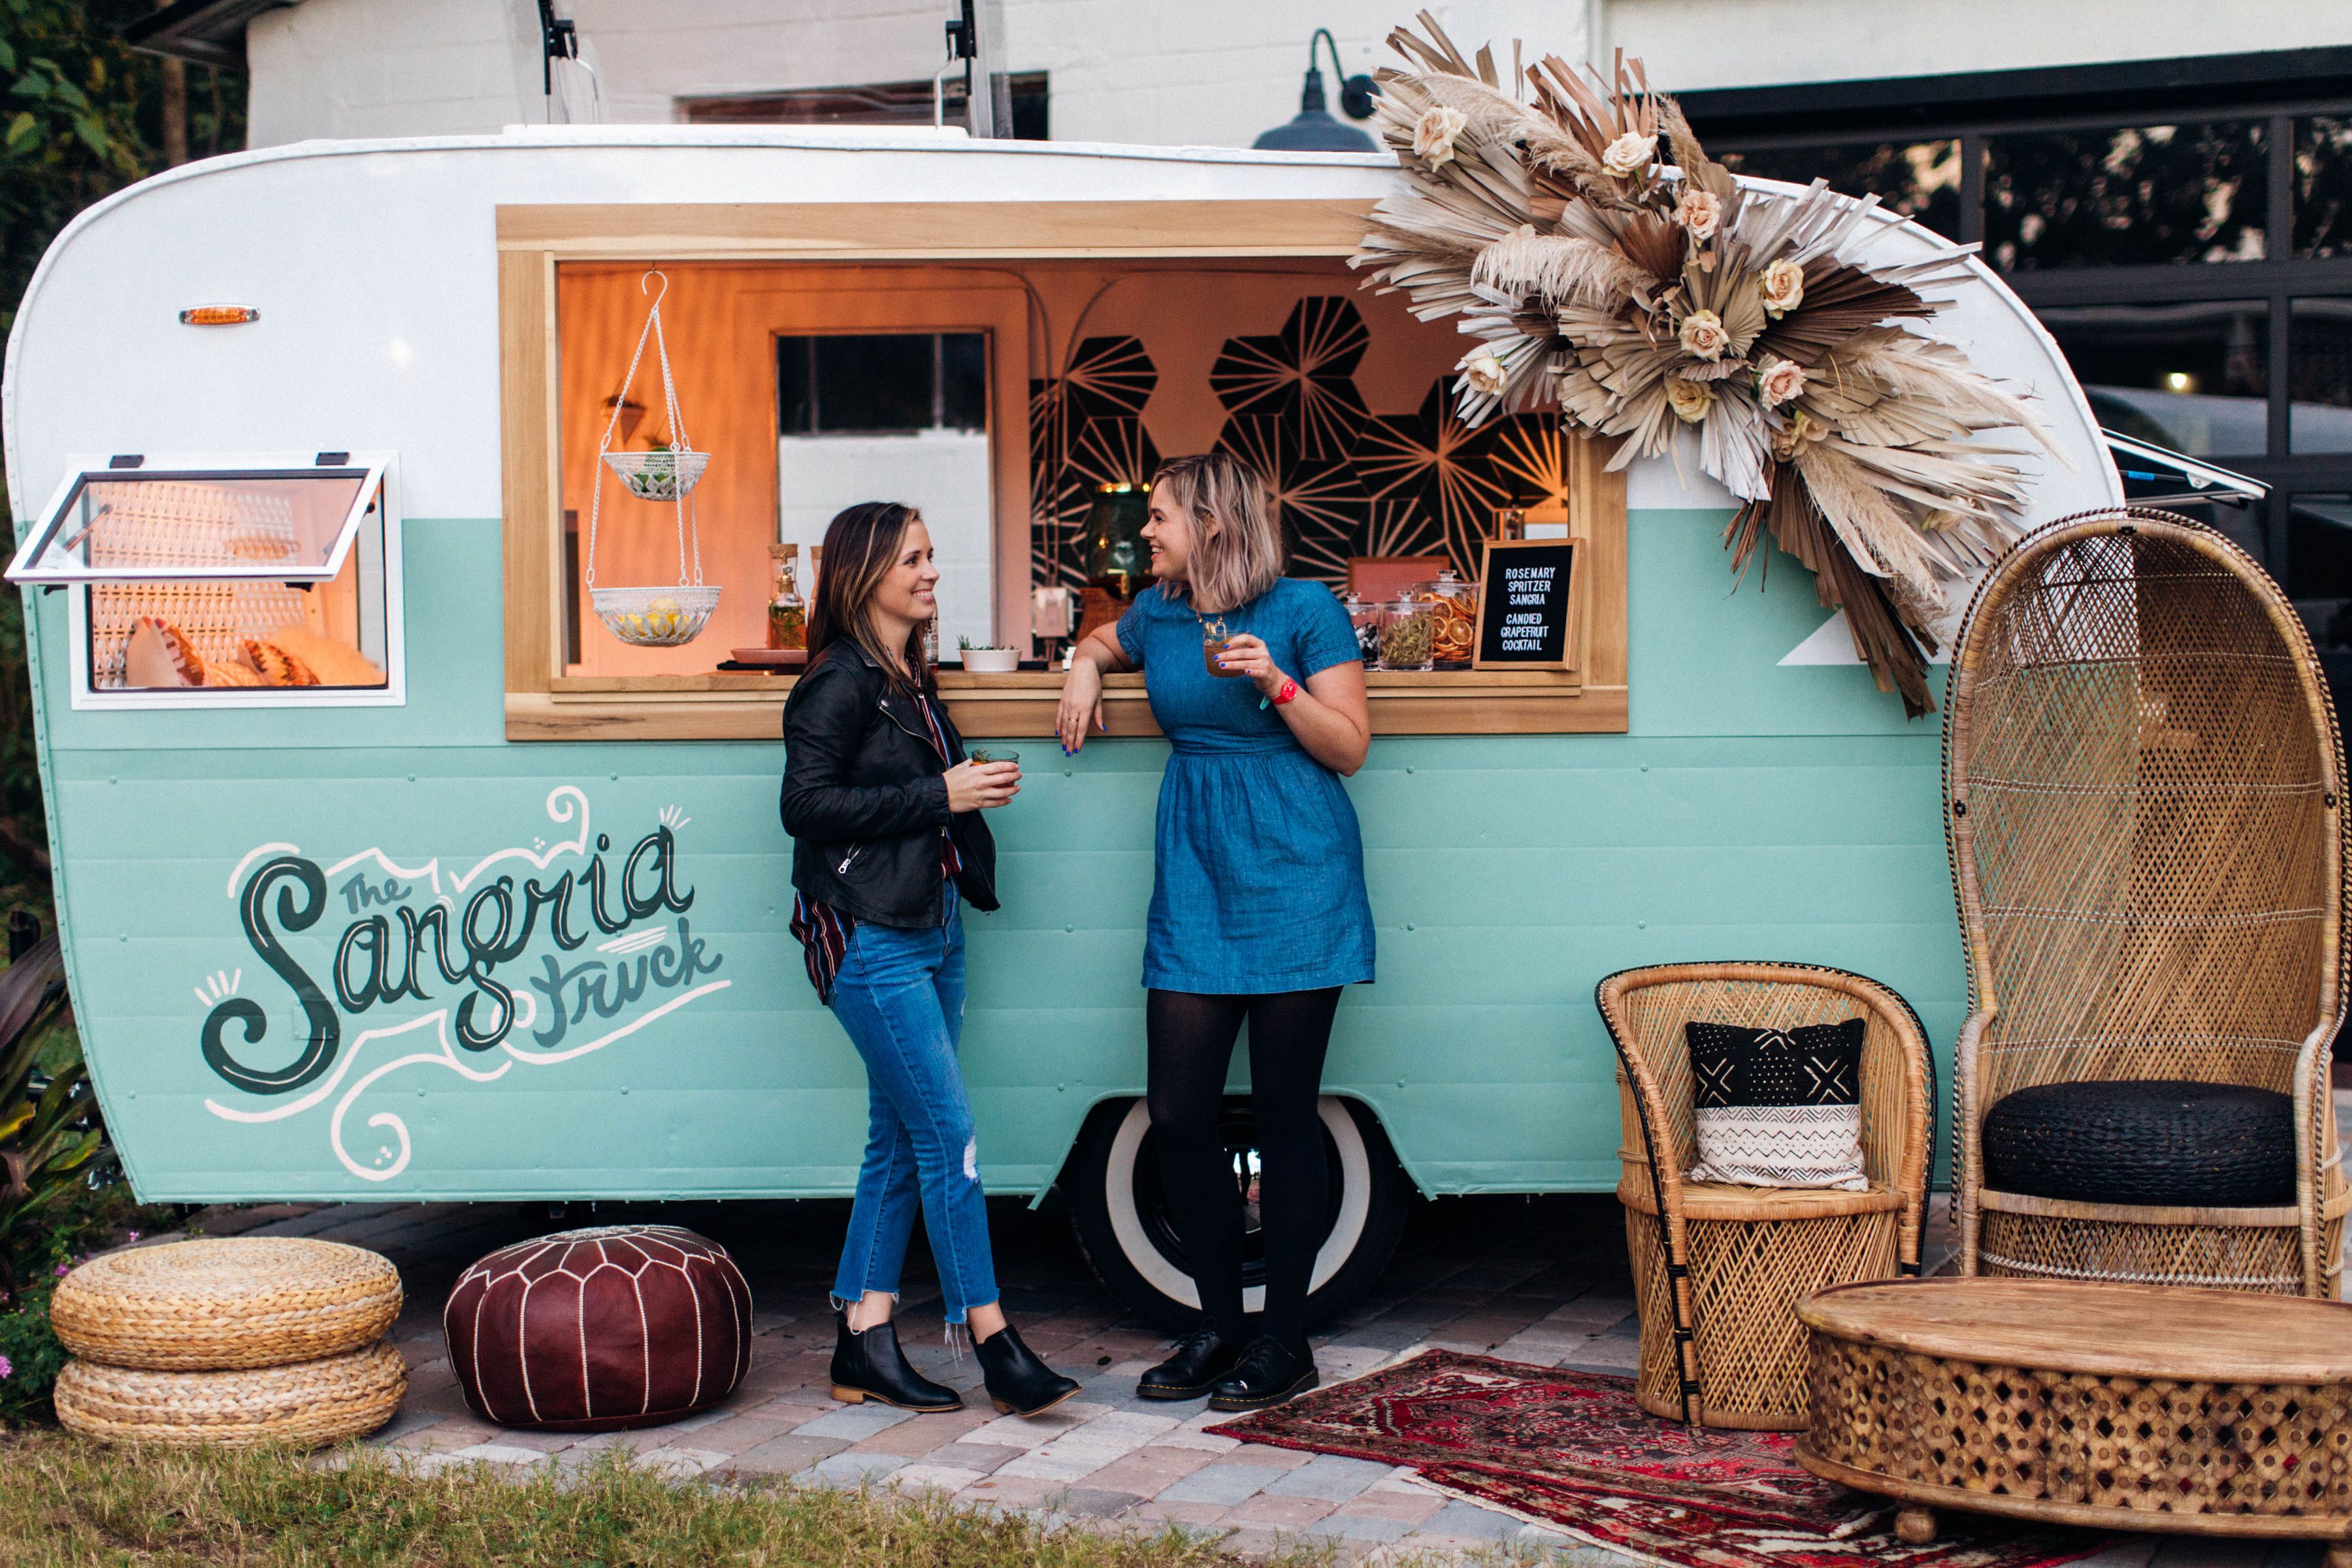 The Sangria Truck | Bar Services & Beverages - The Knot